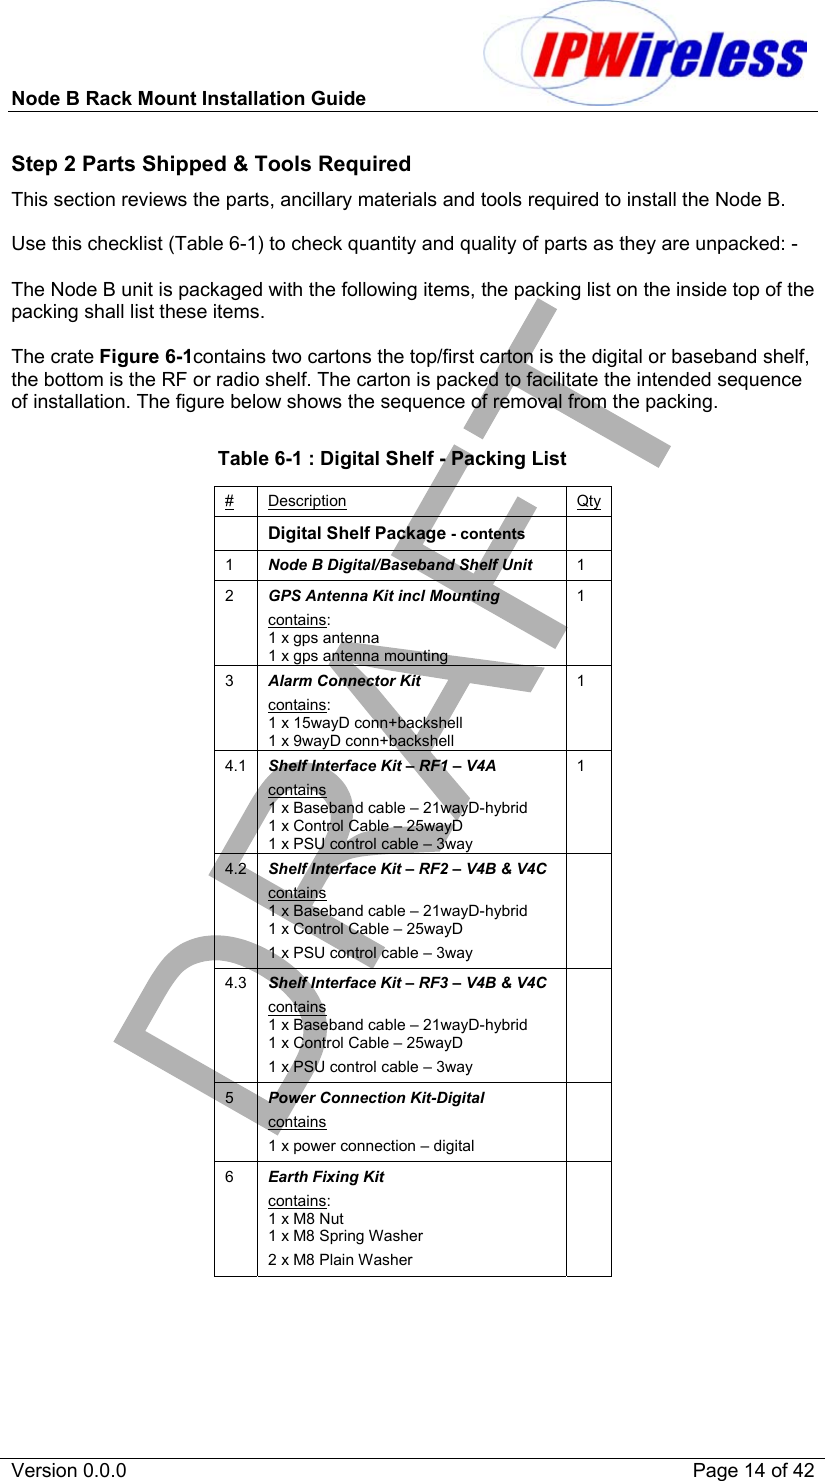 Node B Rack Mount Installation Guide                           Version 0.0.0    Page 14 of 42 Step 2 Parts Shipped &amp; Tools Required This section reviews the parts, ancillary materials and tools required to install the Node B.  Use this checklist (Table 6-1) to check quantity and quality of parts as they are unpacked: -  The Node B unit is packaged with the following items, the packing list on the inside top of the packing shall list these items.  The crate Figure 6-1contains two cartons the top/first carton is the digital or baseband shelf, the bottom is the RF or radio shelf. The carton is packed to facilitate the intended sequence of installation. The figure below shows the sequence of removal from the packing.  Table 6-1 : Digital Shelf - Packing List # Description Qty  Digital Shelf Package - contents   1  Node B Digital/Baseband Shelf Unit  1 2  GPS Antenna Kit incl Mounting contains:  1 x gps antenna  1 x gps antenna mounting 1 3  Alarm Connector Kit contains: 1 x 15wayD conn+backshell 1 x 9wayD conn+backshell 1 4.1  Shelf Interface Kit – RF1 – V4A contains 1 x Baseband cable – 21wayD-hybrid 1 x Control Cable – 25wayD 1 x PSU control cable – 3way 1 4.2  Shelf Interface Kit – RF2 – V4B &amp; V4C contains 1 x Baseband cable – 21wayD-hybrid 1 x Control Cable – 25wayD 1 x PSU control cable – 3way  4.3  Shelf Interface Kit – RF3 – V4B &amp; V4C contains 1 x Baseband cable – 21wayD-hybrid 1 x Control Cable – 25wayD 1 x PSU control cable – 3way  5  Power Connection Kit-Digital contains 1 x power connection – digital  6  Earth Fixing Kit contains:  1 x M8 Nut 1 x M8 Spring Washer 2 x M8 Plain Washer    